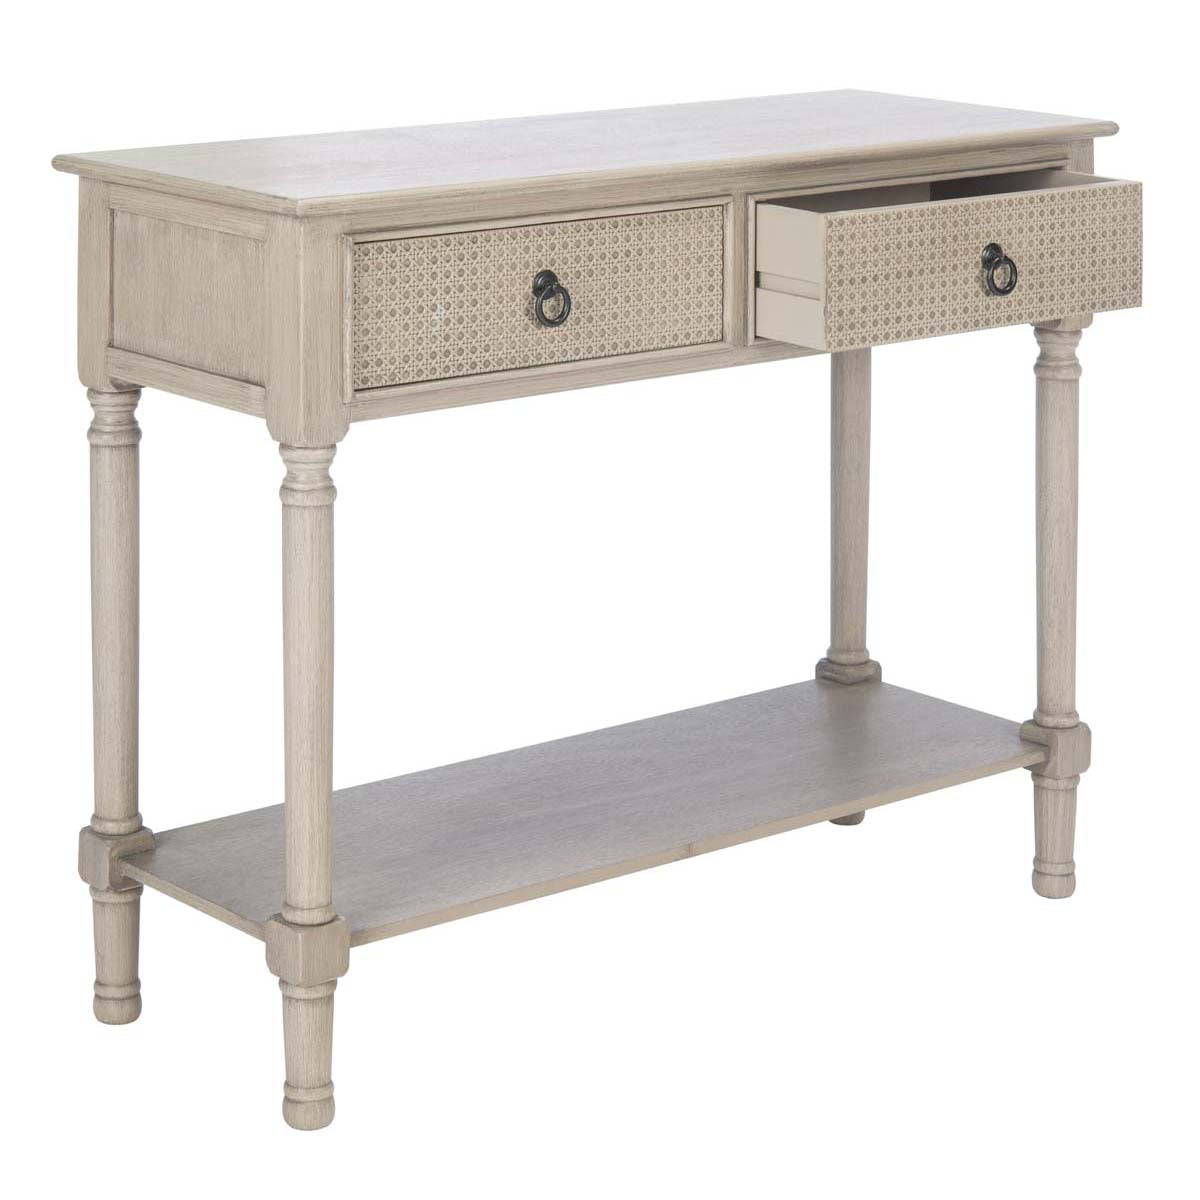 Safavieh Haines 2Drw Console Table, CNS5727 - Greige